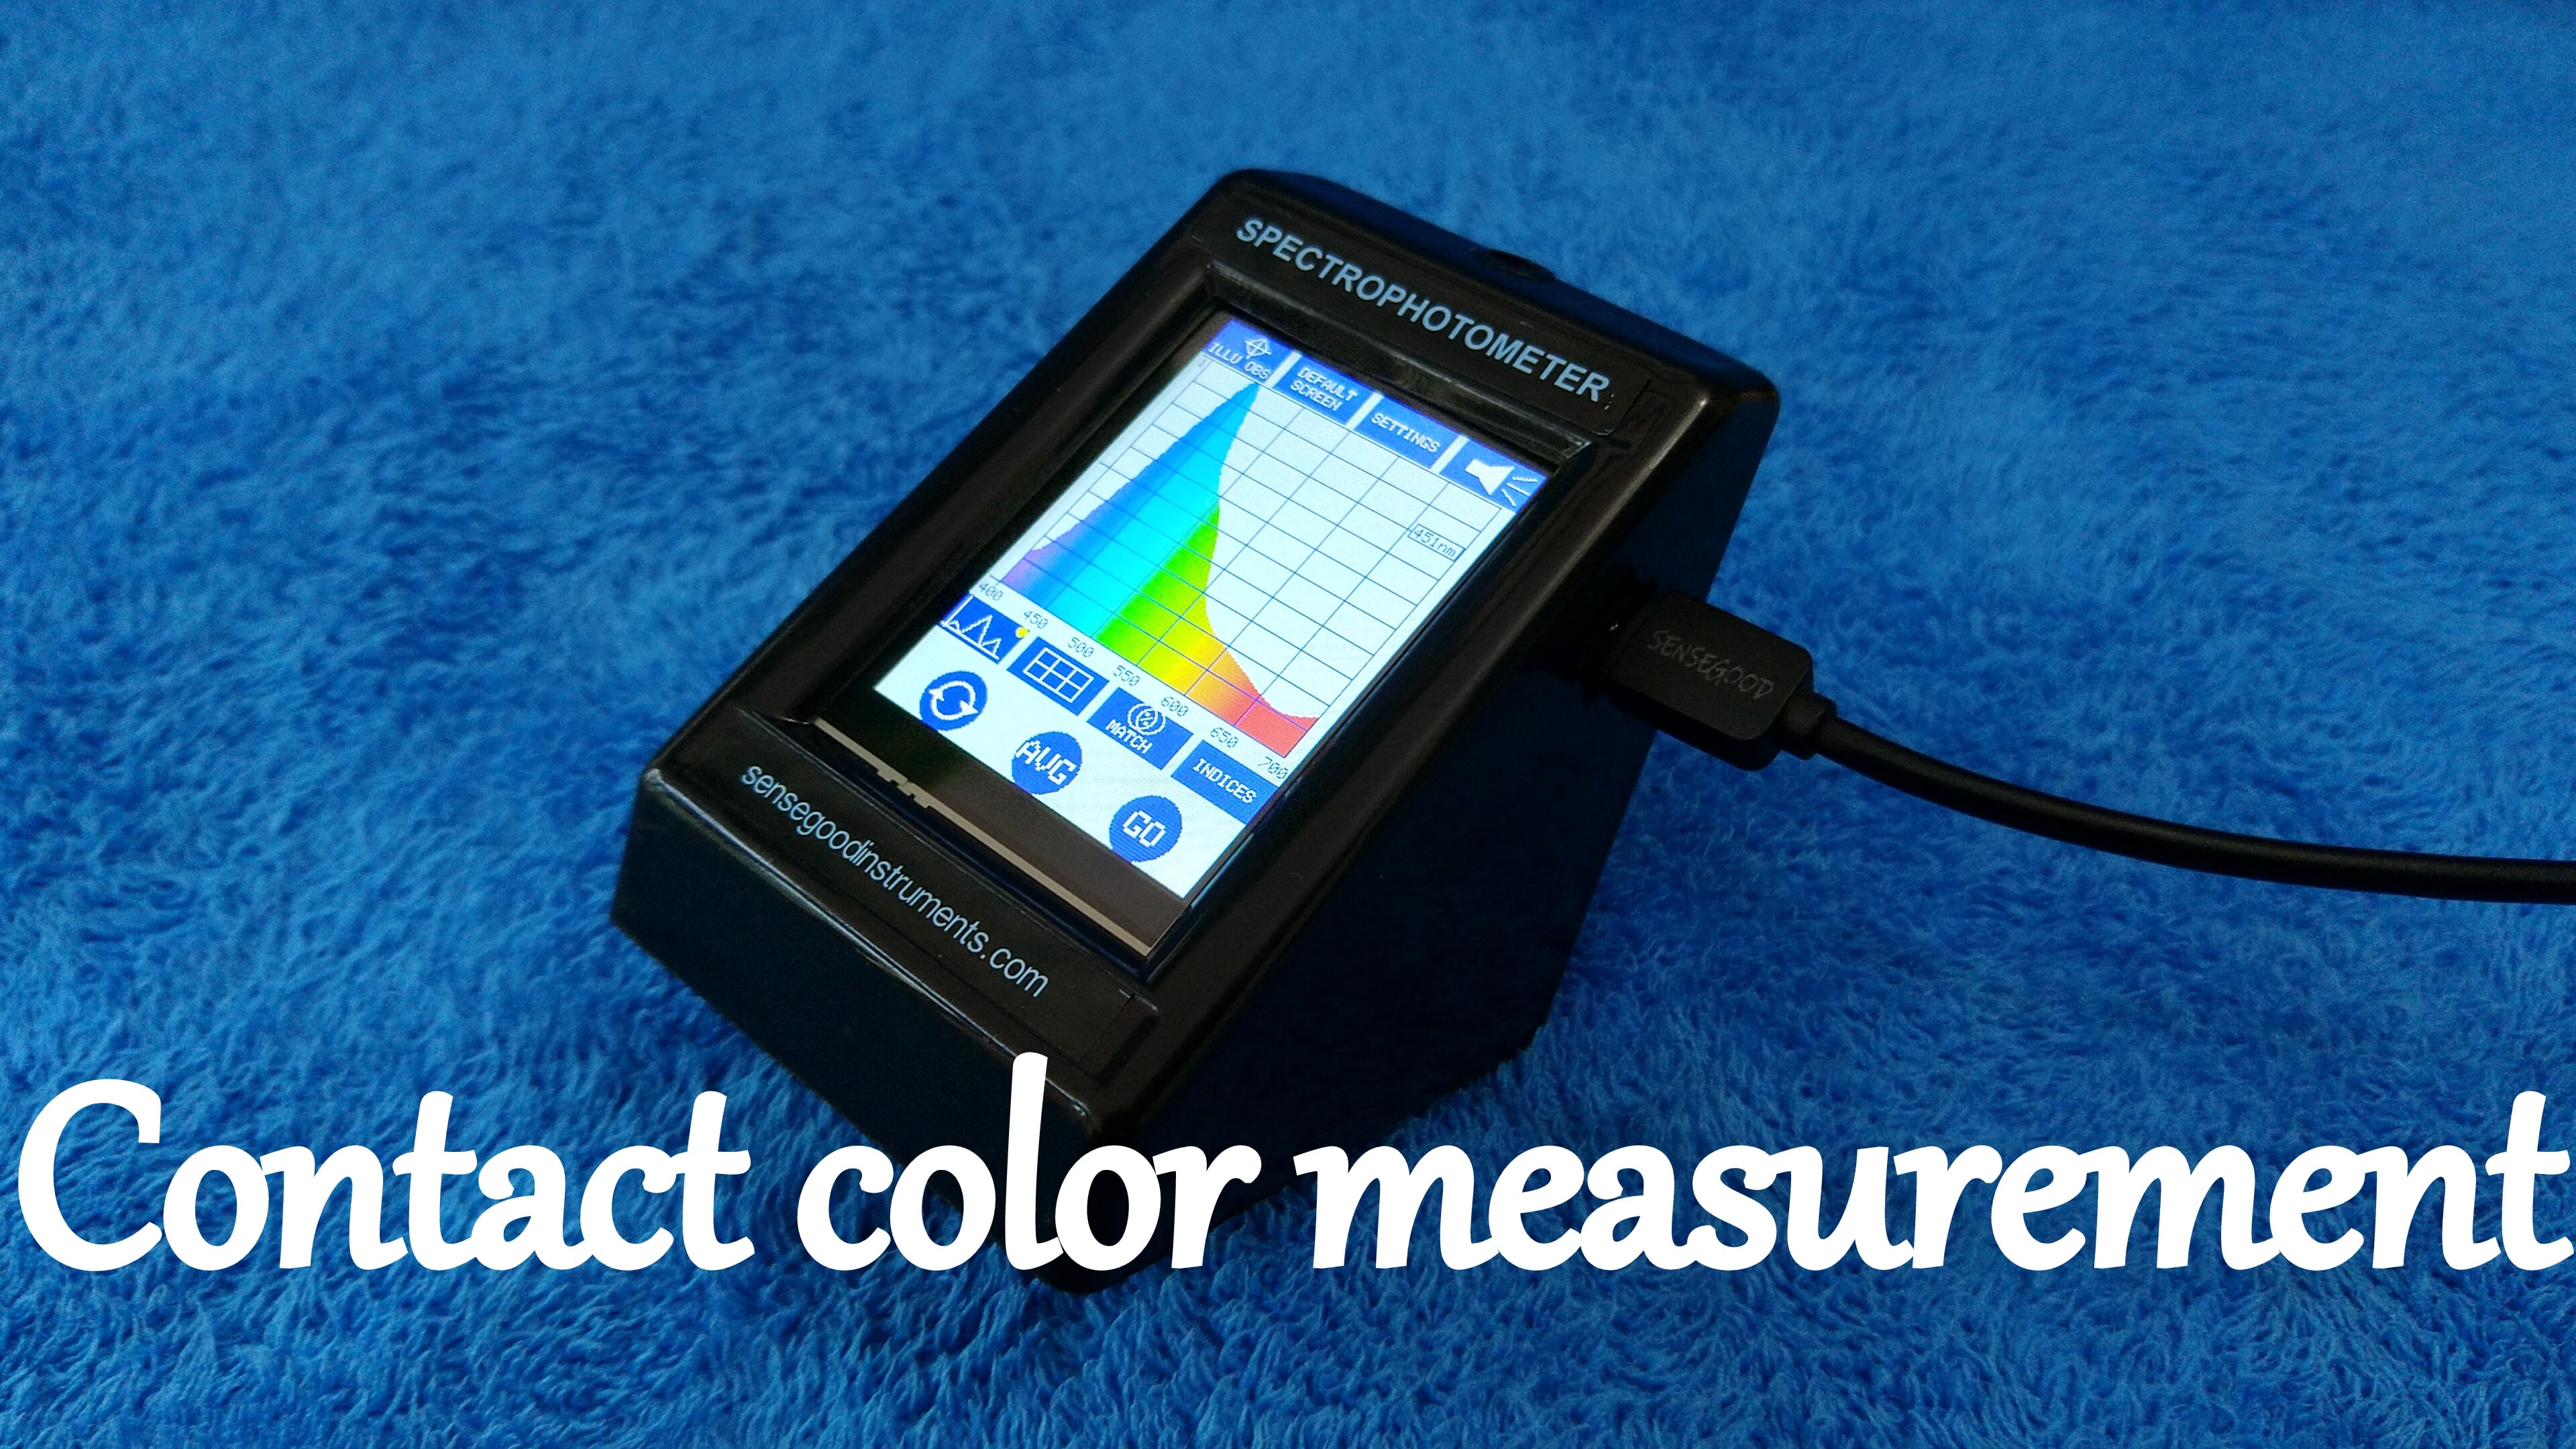 new arrival ACCURATE High precision Digital Photo Colorimeter Portable Photoelectric Colorimeter handheld colorimeter LOW PRICE Handheld Laboratory Industrial Colorimeter hot SALE Colorimeter for liquid paste pulp powder solid cheap colorimeter best colorimeter Hunter lab colorimeter Hunterlab color cie lab color reflectance colorimeter color Spectrophotometer new colorimeter price color spectrophotometer price Visible vis spectrophotometer portable laboratory spectrophotometer LED beam lab spectrophotometer types digital spectrophotometer portable cheap mini spectrophotometer led electronics microprocessor spectrophotometer portable color benchtop table top tabletop spectrophotometer for sale lcd touch panel touch screen spectrophotometer manufacturer color spectrometer color meter spectrometer color analyzer tester Color measuring instruments machine Portable digital color meter color difference meter price color match color matching machine device system get color discoloration match color matching spectrophotometer whiteness meter tester machine tintometer